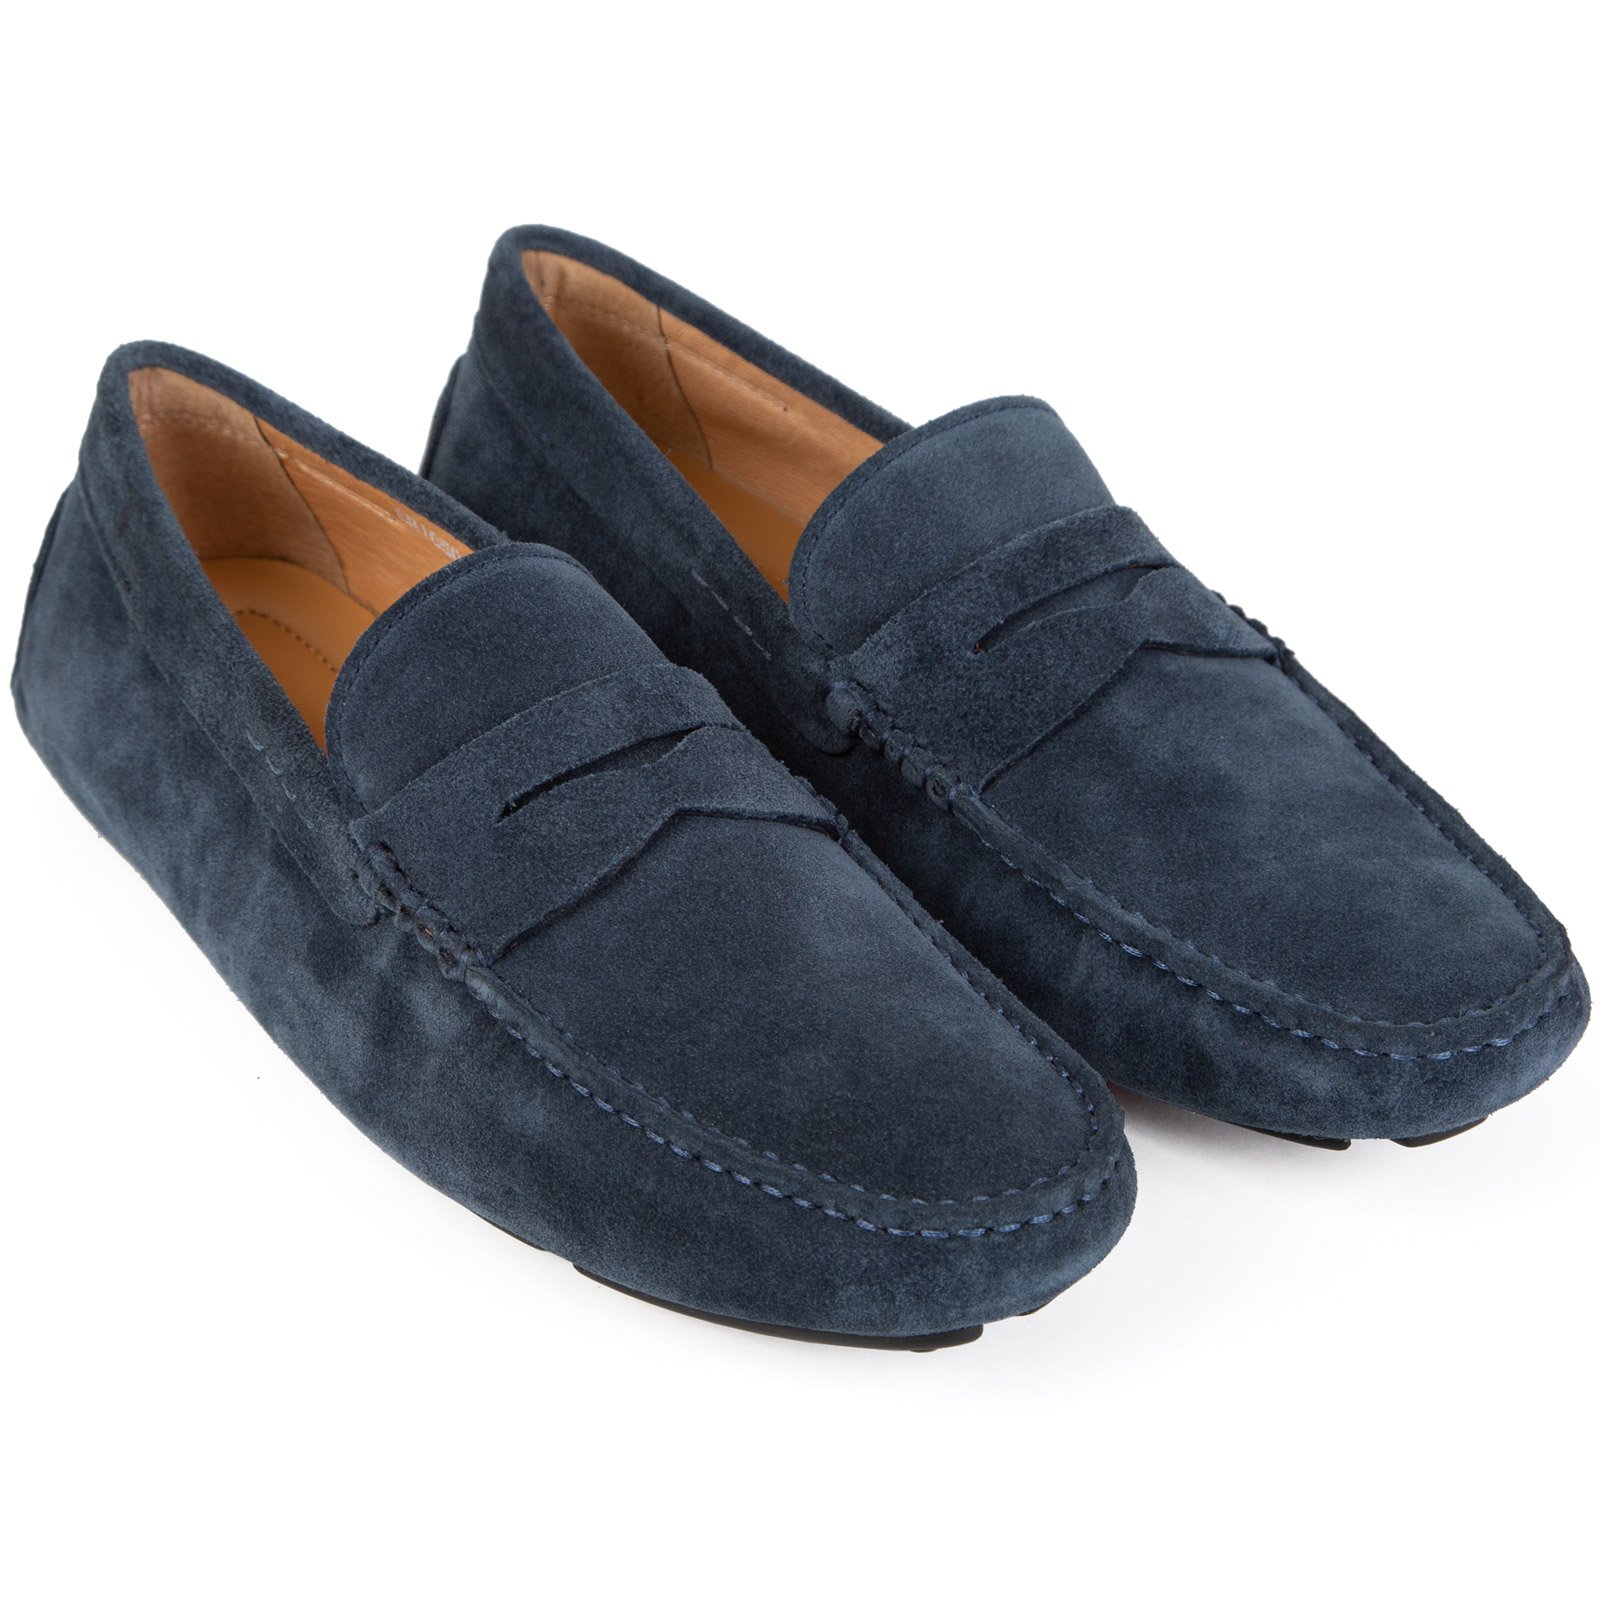 Harry Suede Leather Slipon Penny Loafer Moccasin - Shoes & Boots-Casual ...